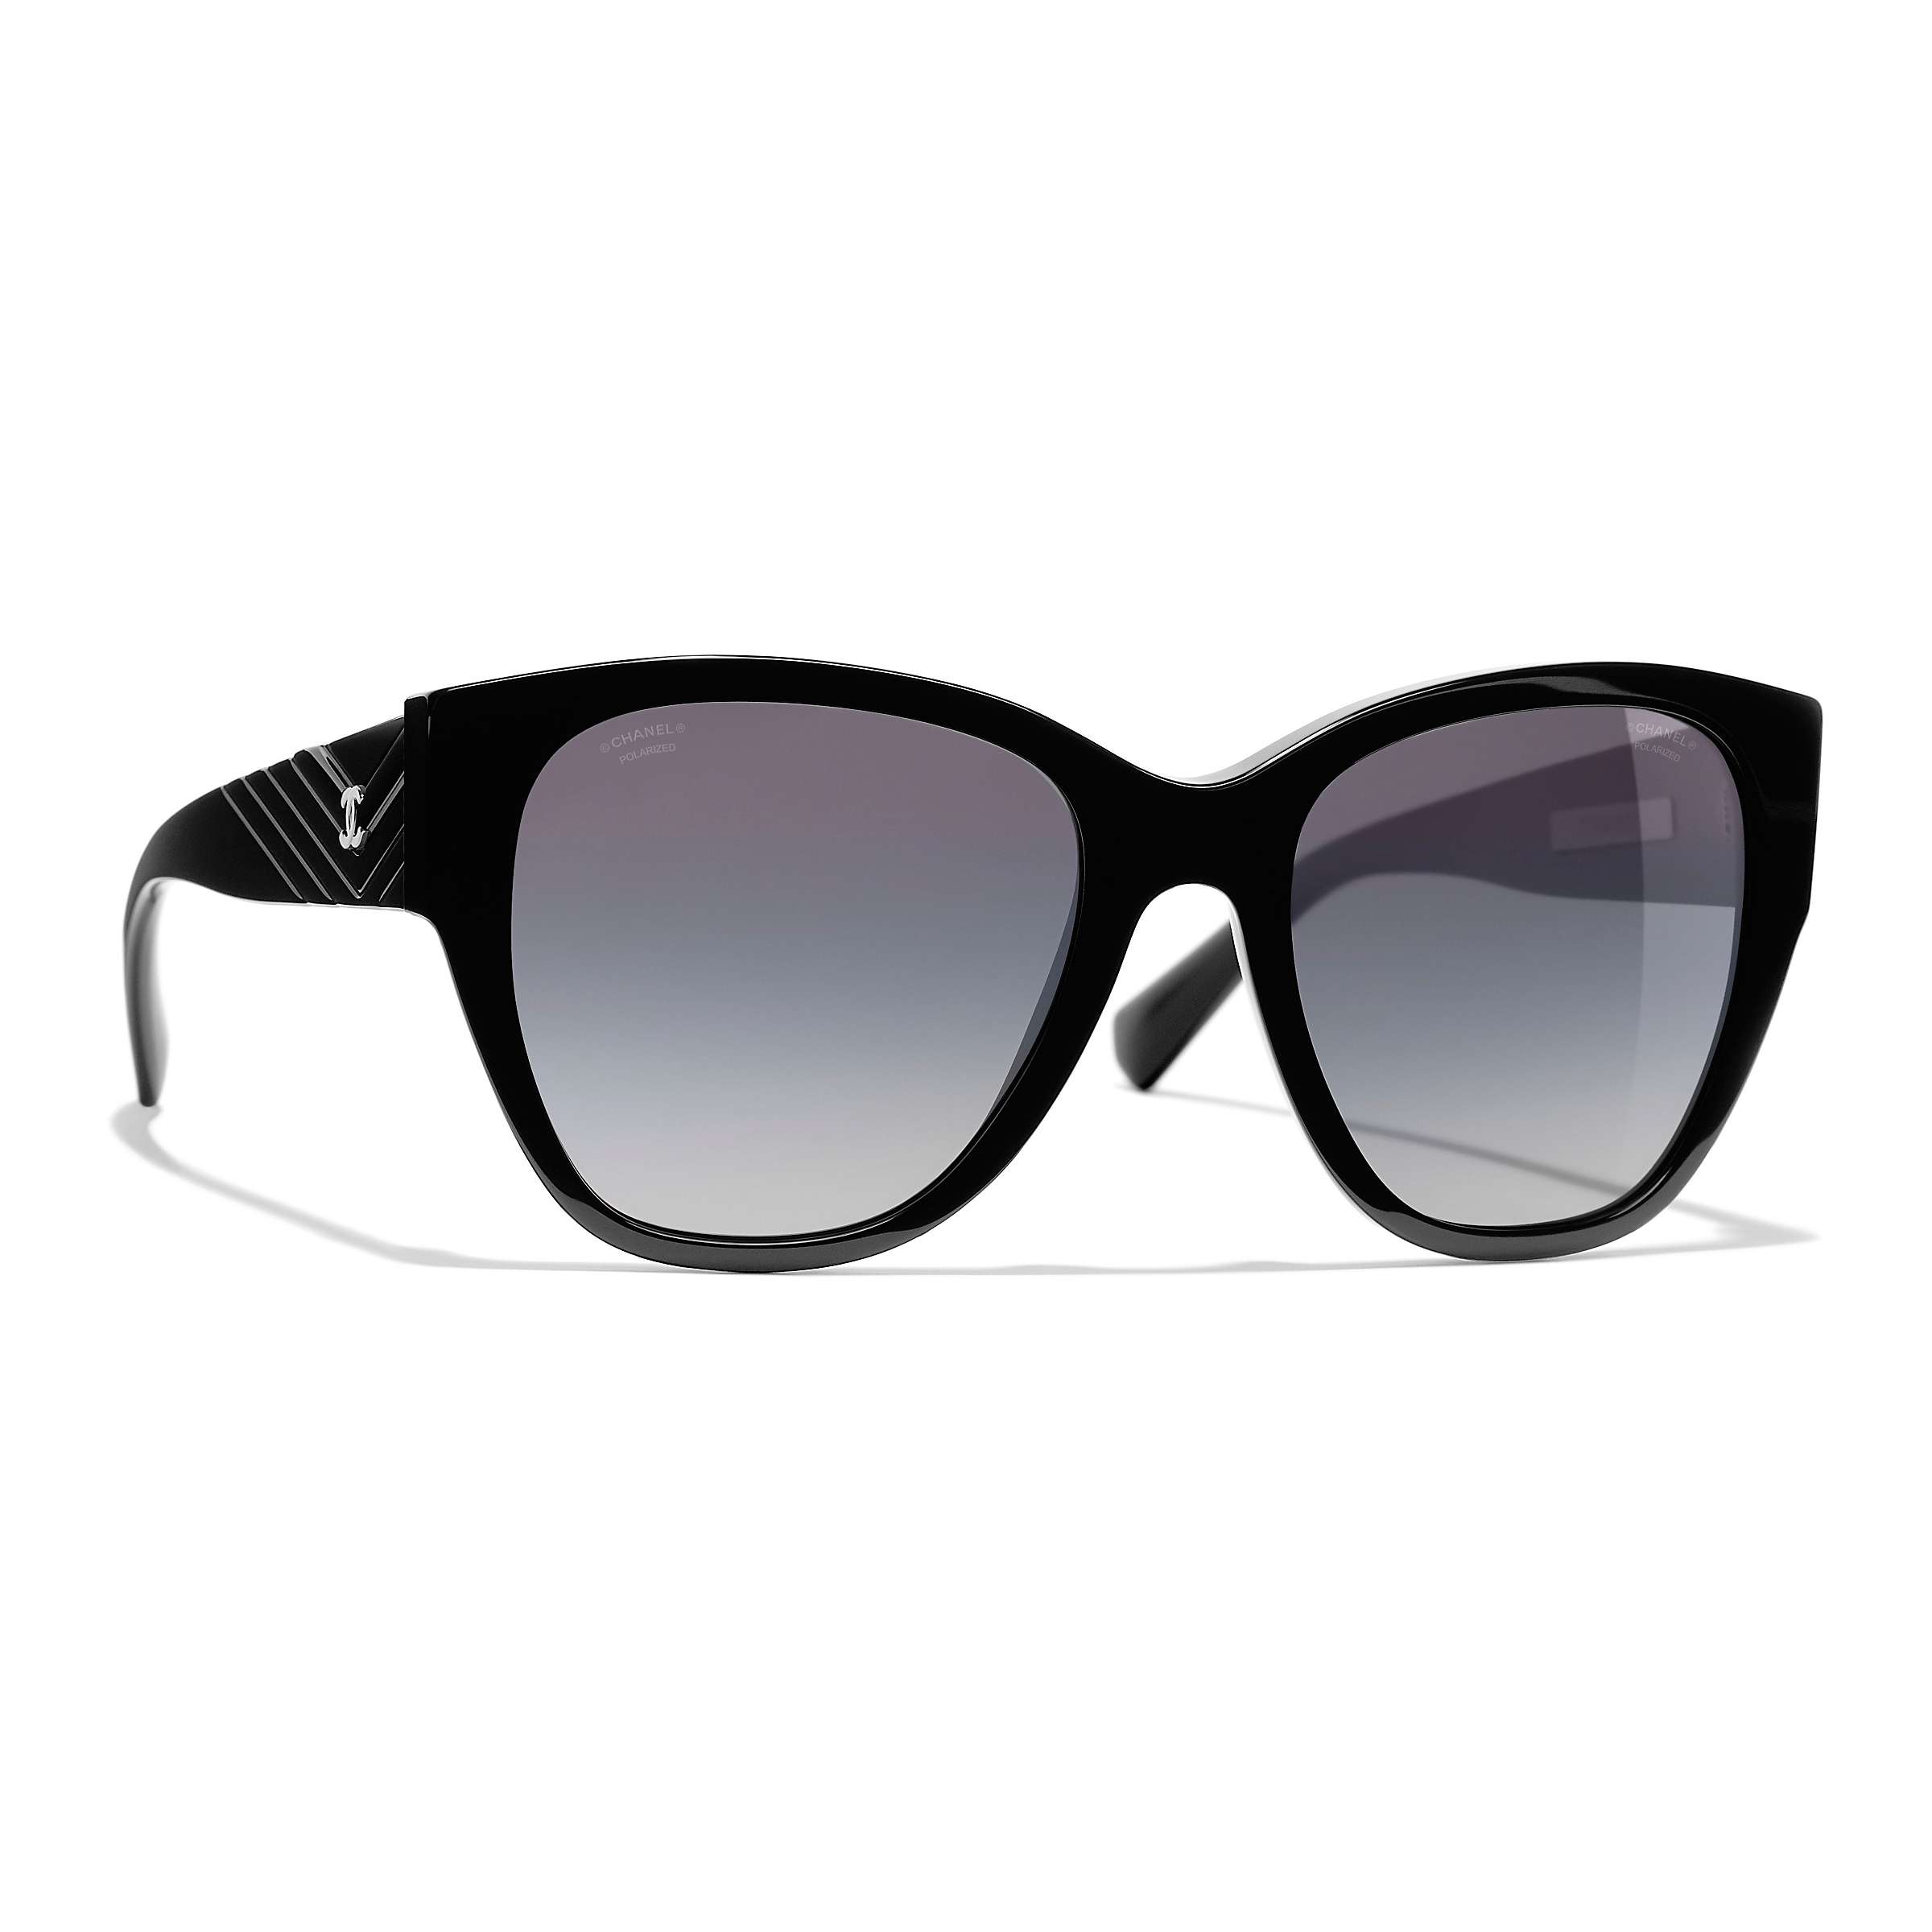 Buy CHANEL Polarised Butterfly Sunglasses CH5412 Black/Grey Gradient Online at johnlewis.com